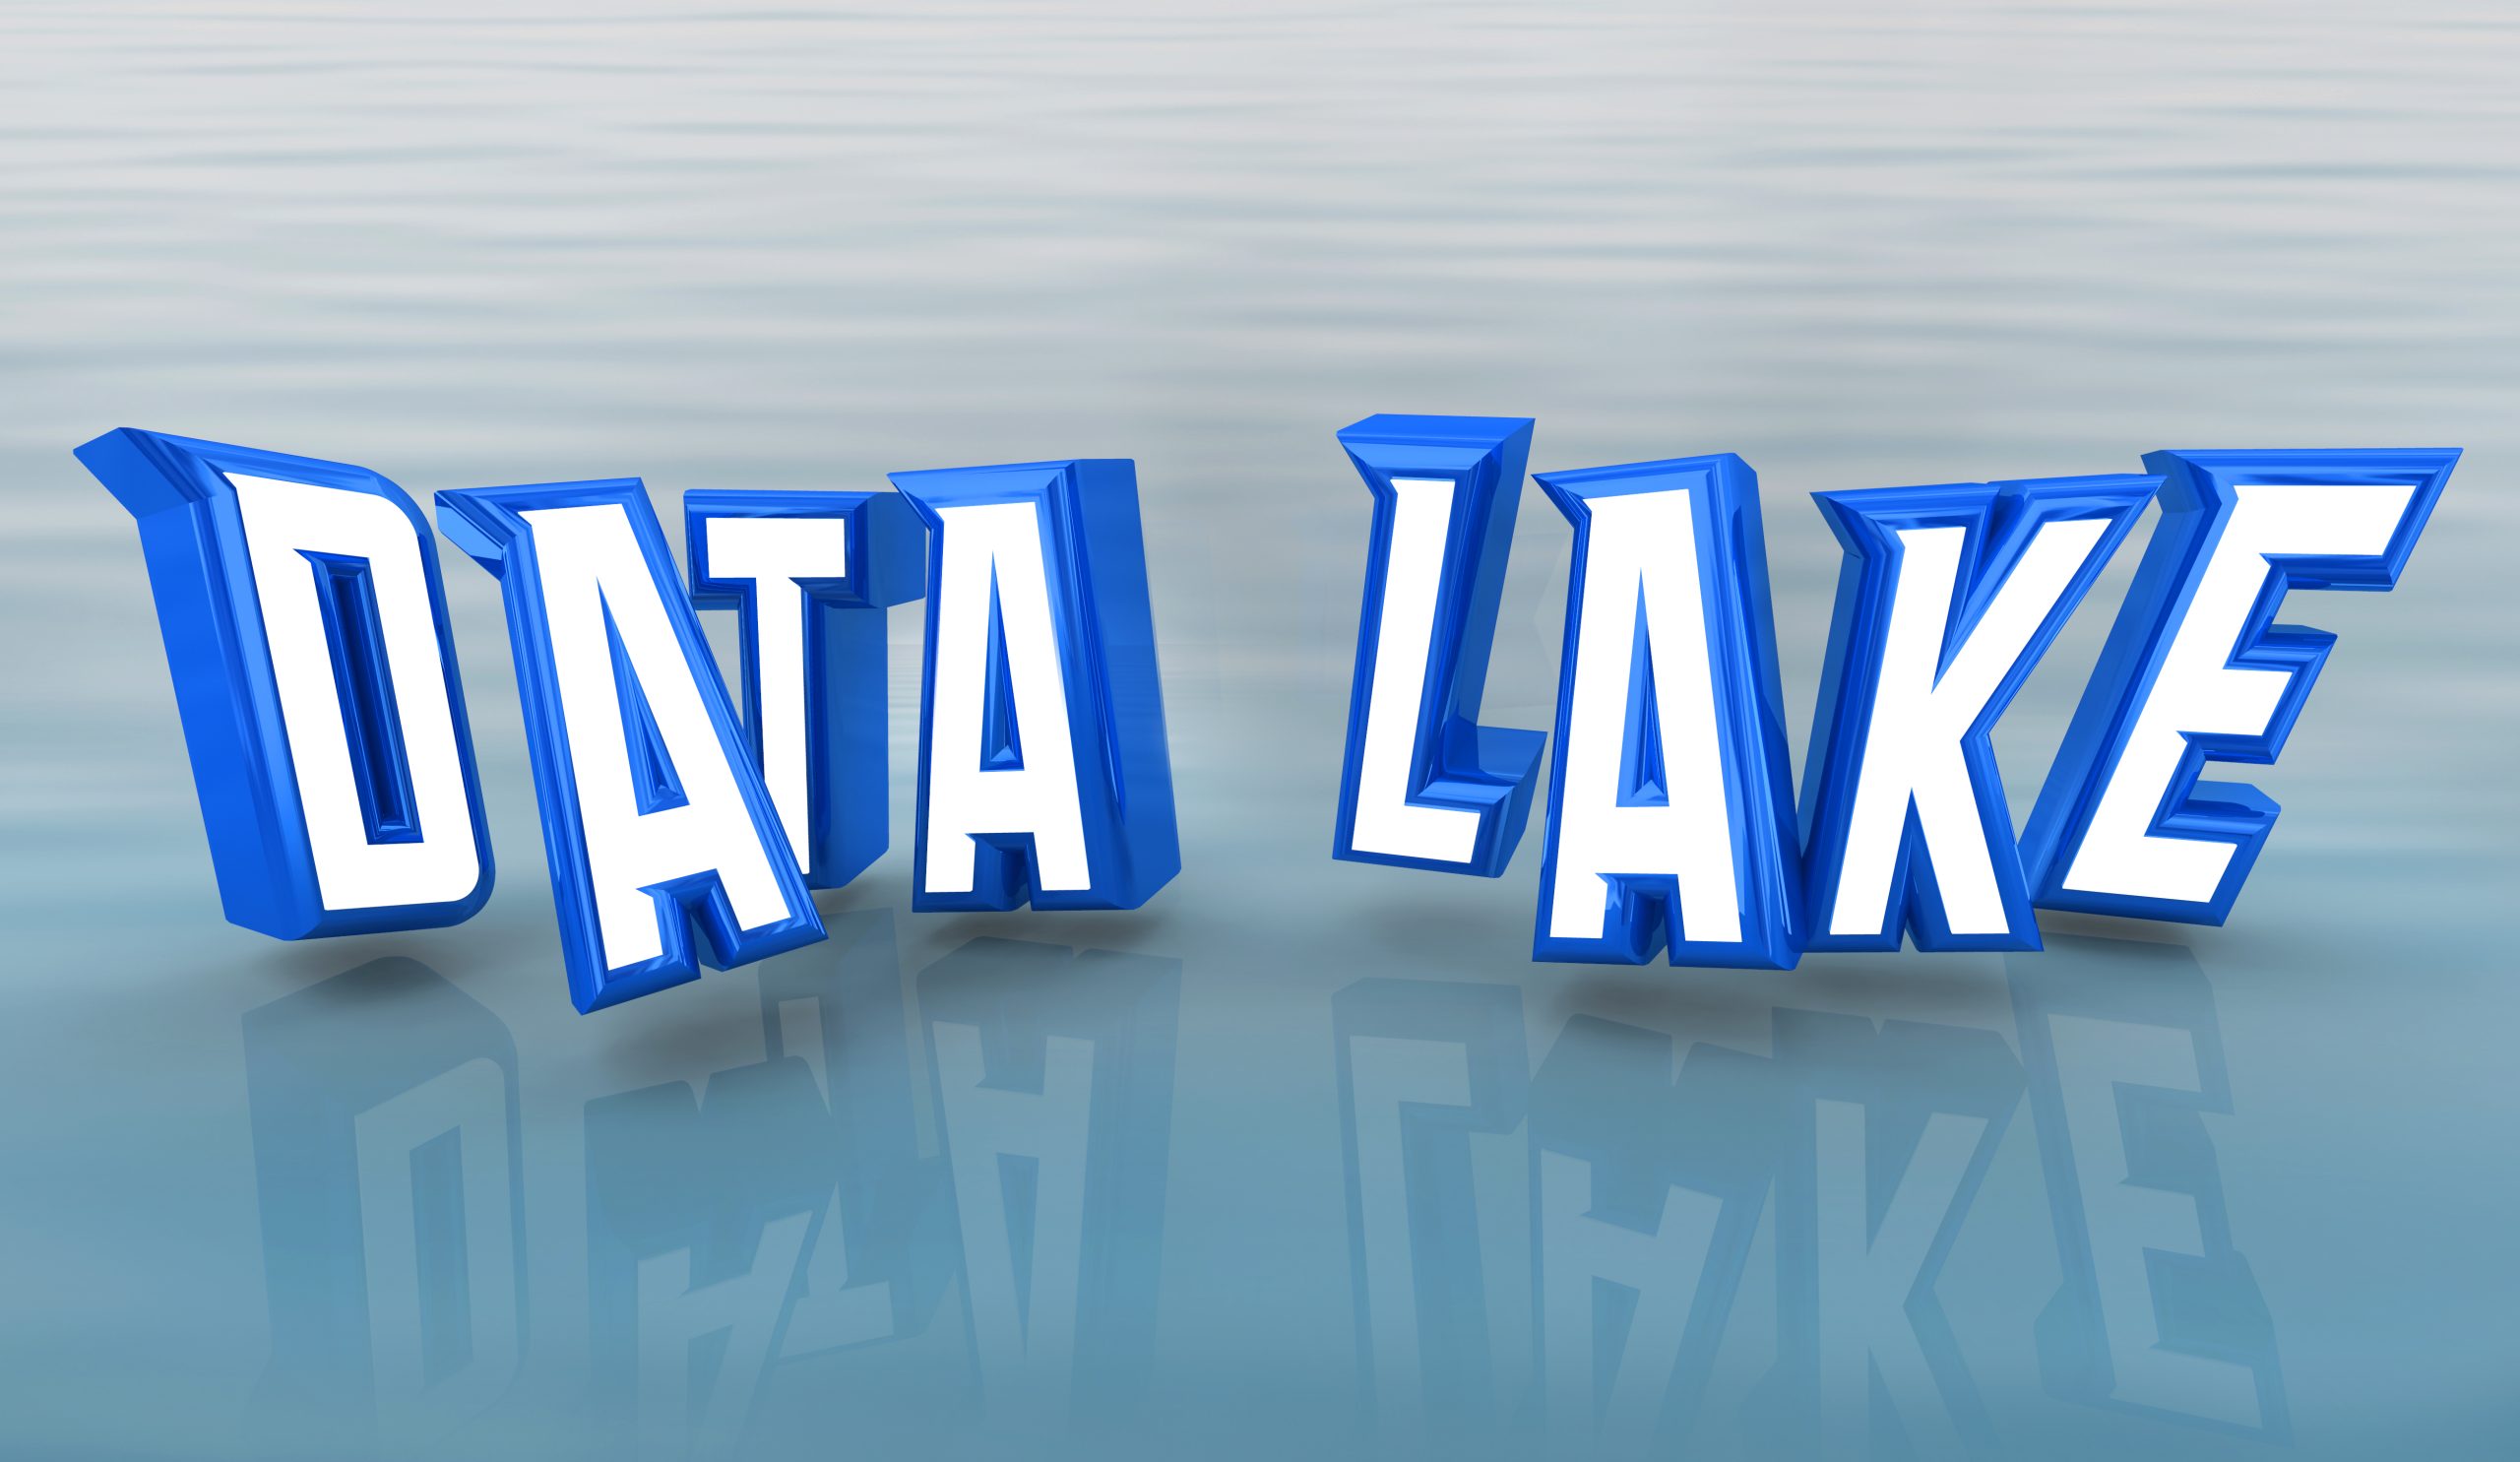 3D Letters that say "Data Lake"